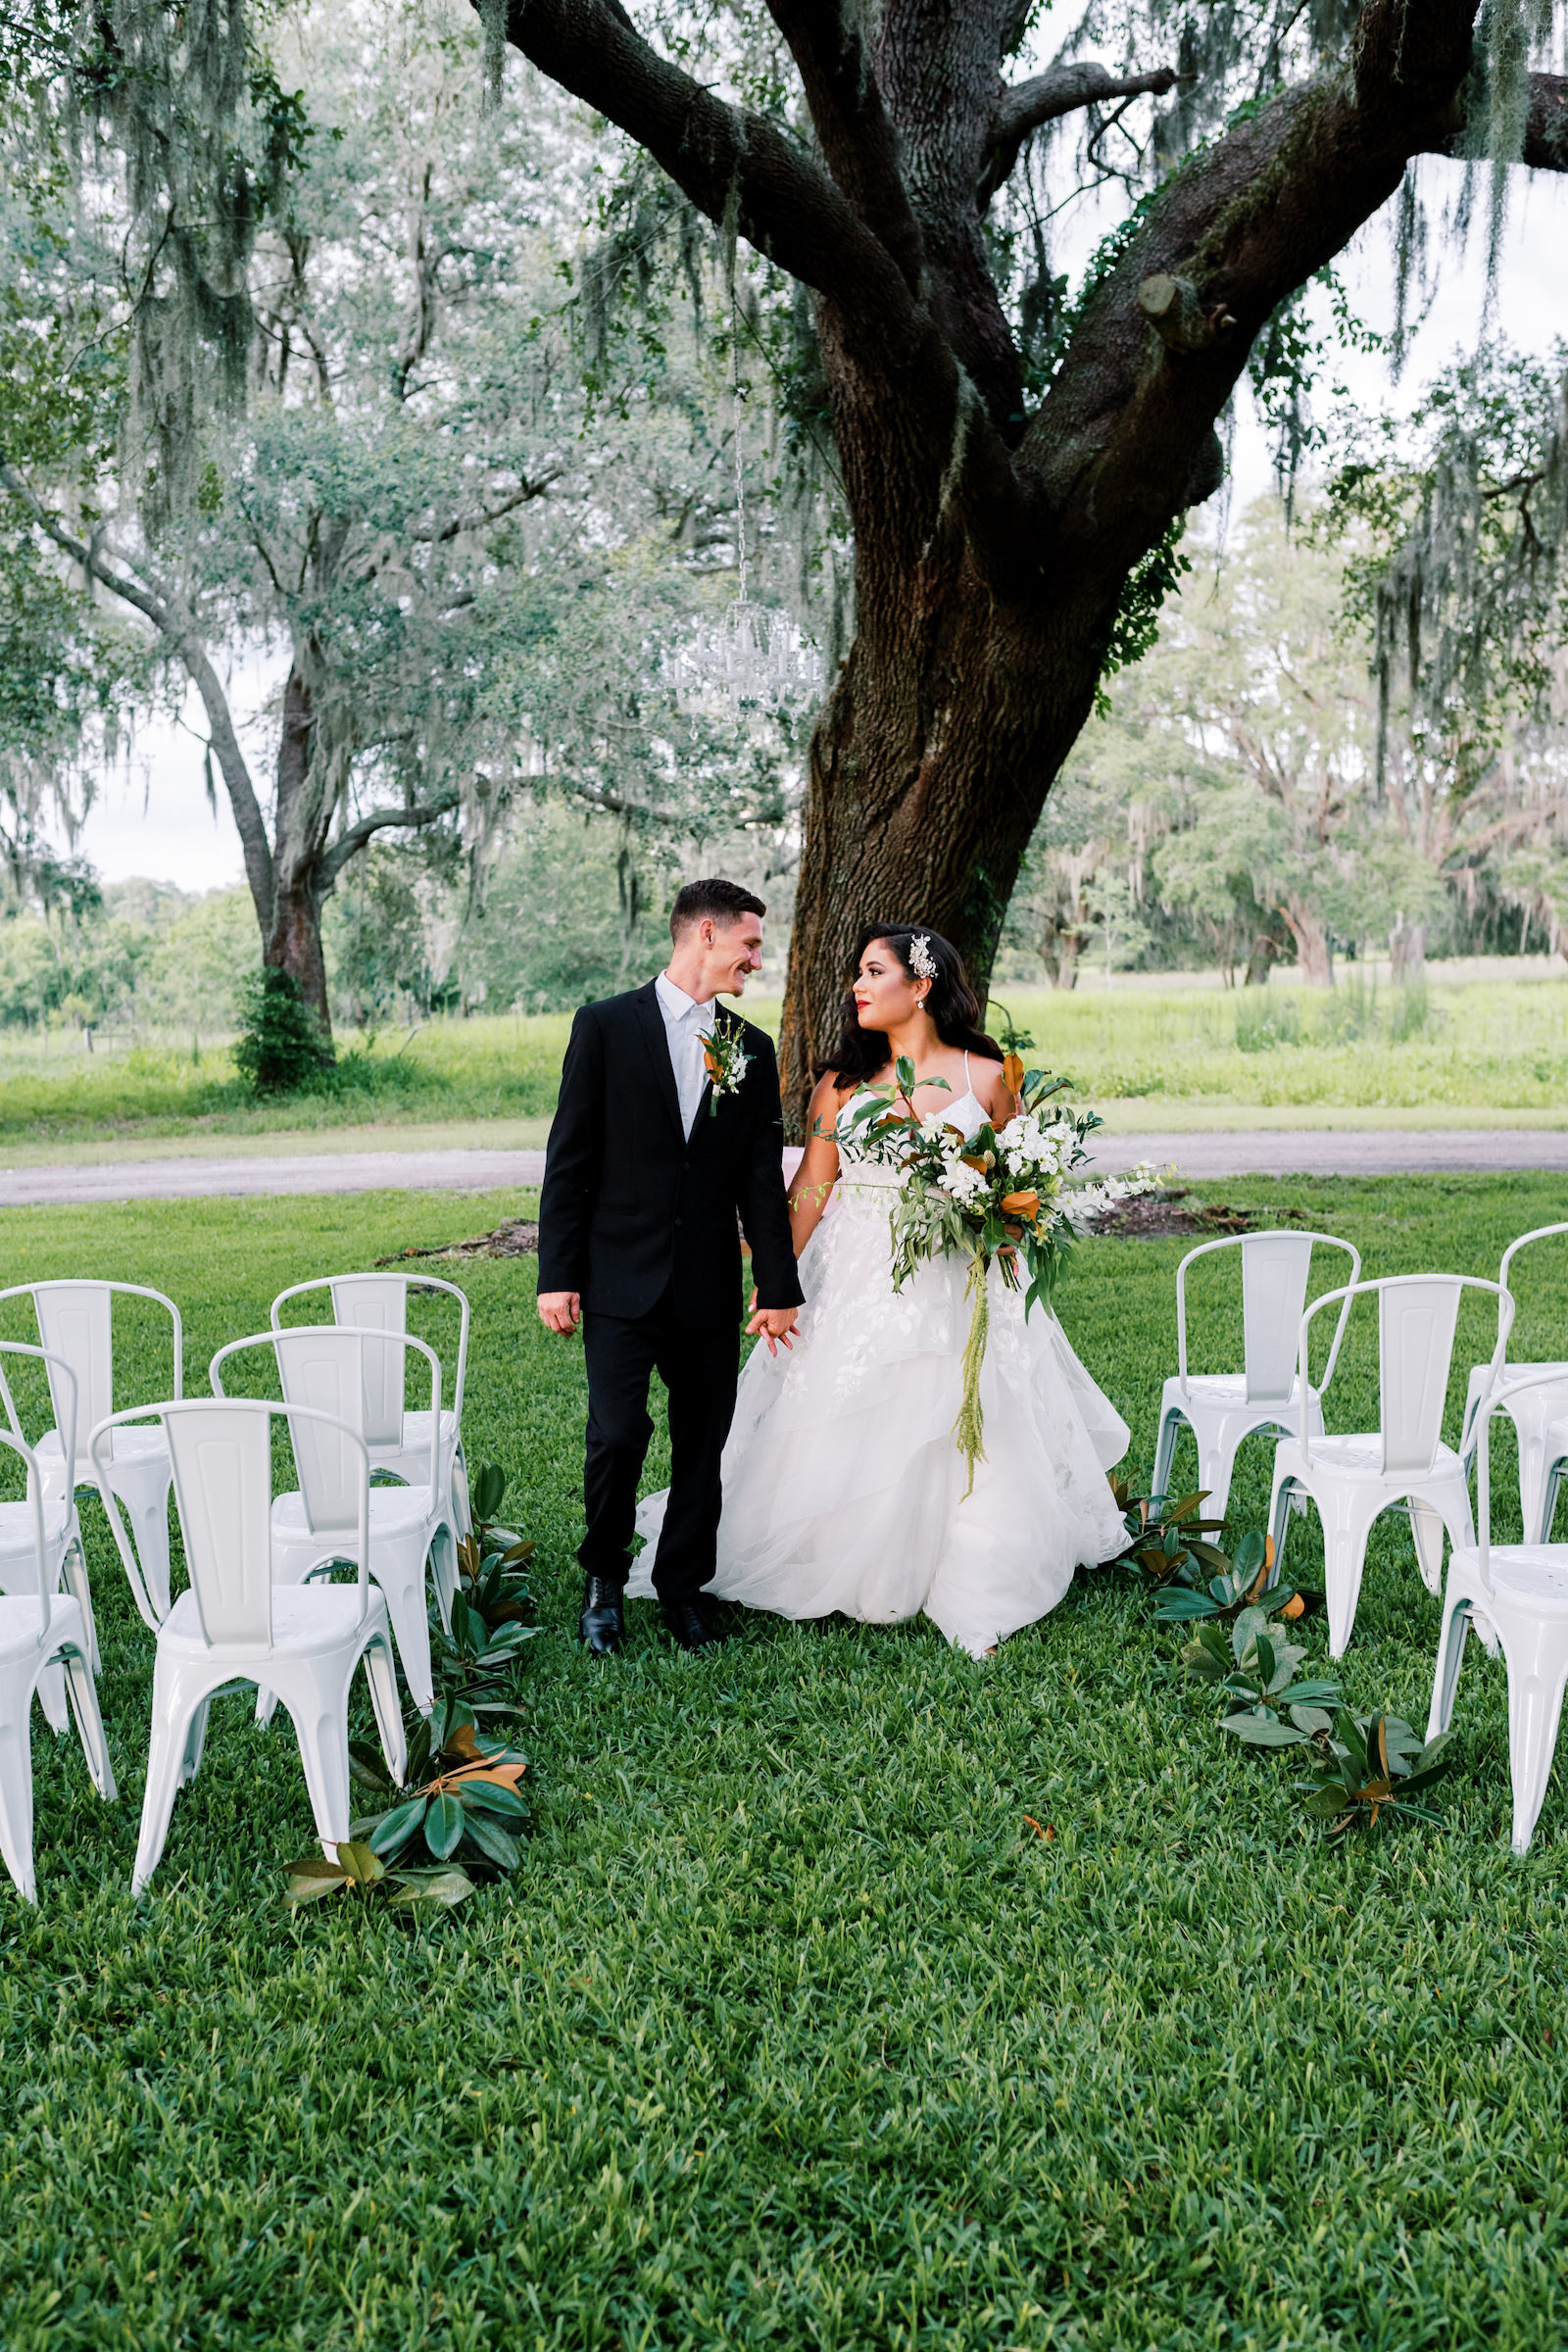 Vintage Inspired Outdoor Florida Wedding Ceremony at Two Sisters Ranch in Dade City, Bride holding Extravagant Magnolia Leaf Bouquet with White Florals, Wearing Hollywood Style Glam Hairstyle | Tampa Bay Luxury Wedding Planner EventFull Weddings